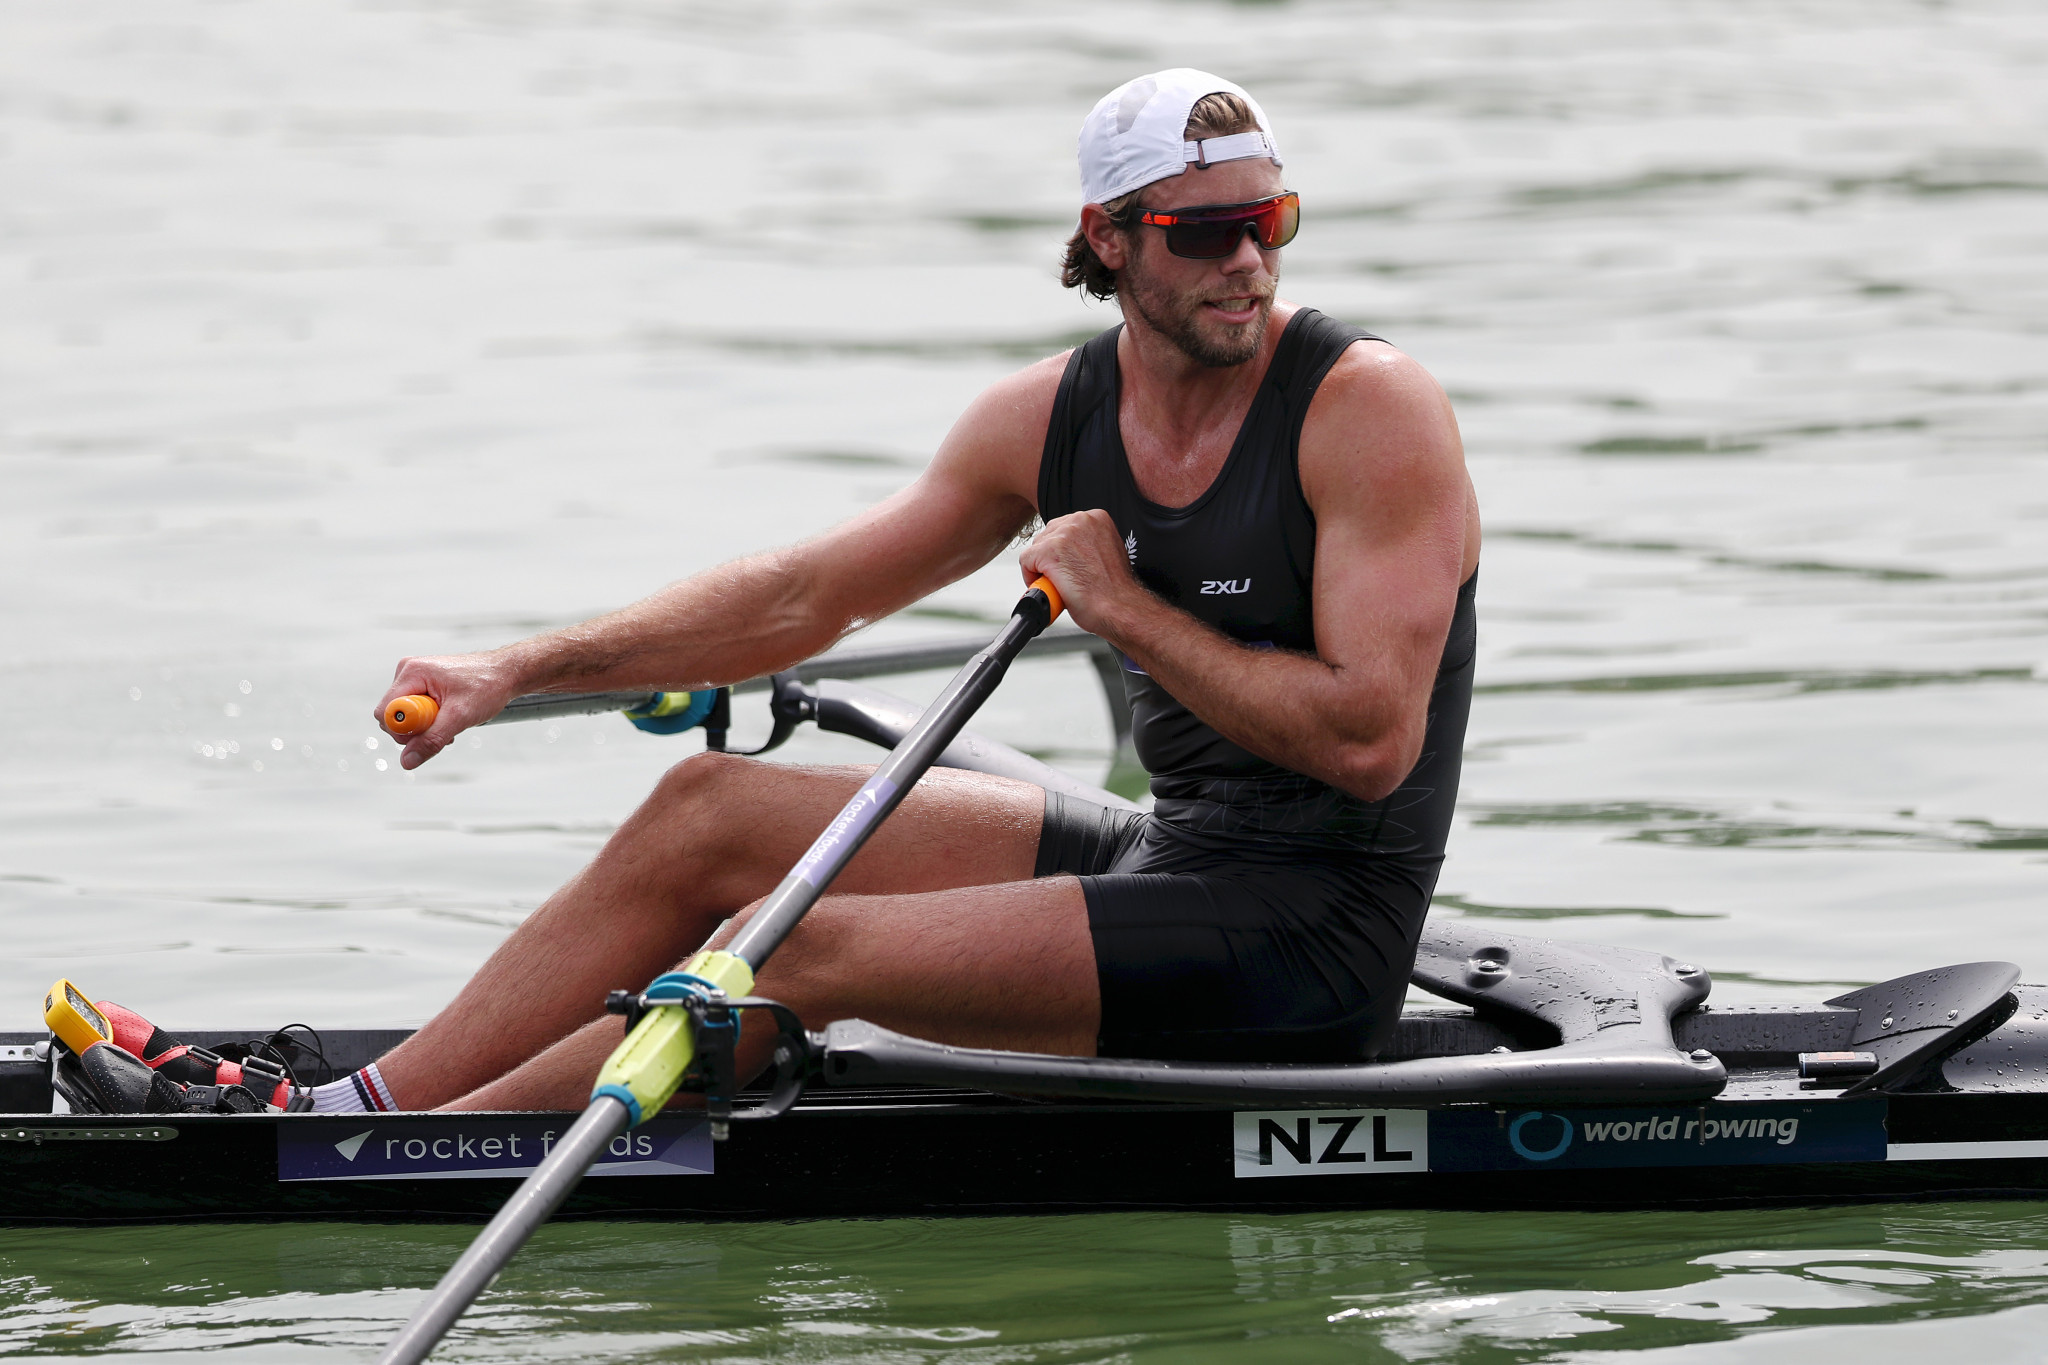 New Zealand sculler Manson targets Olympics comeback at 33